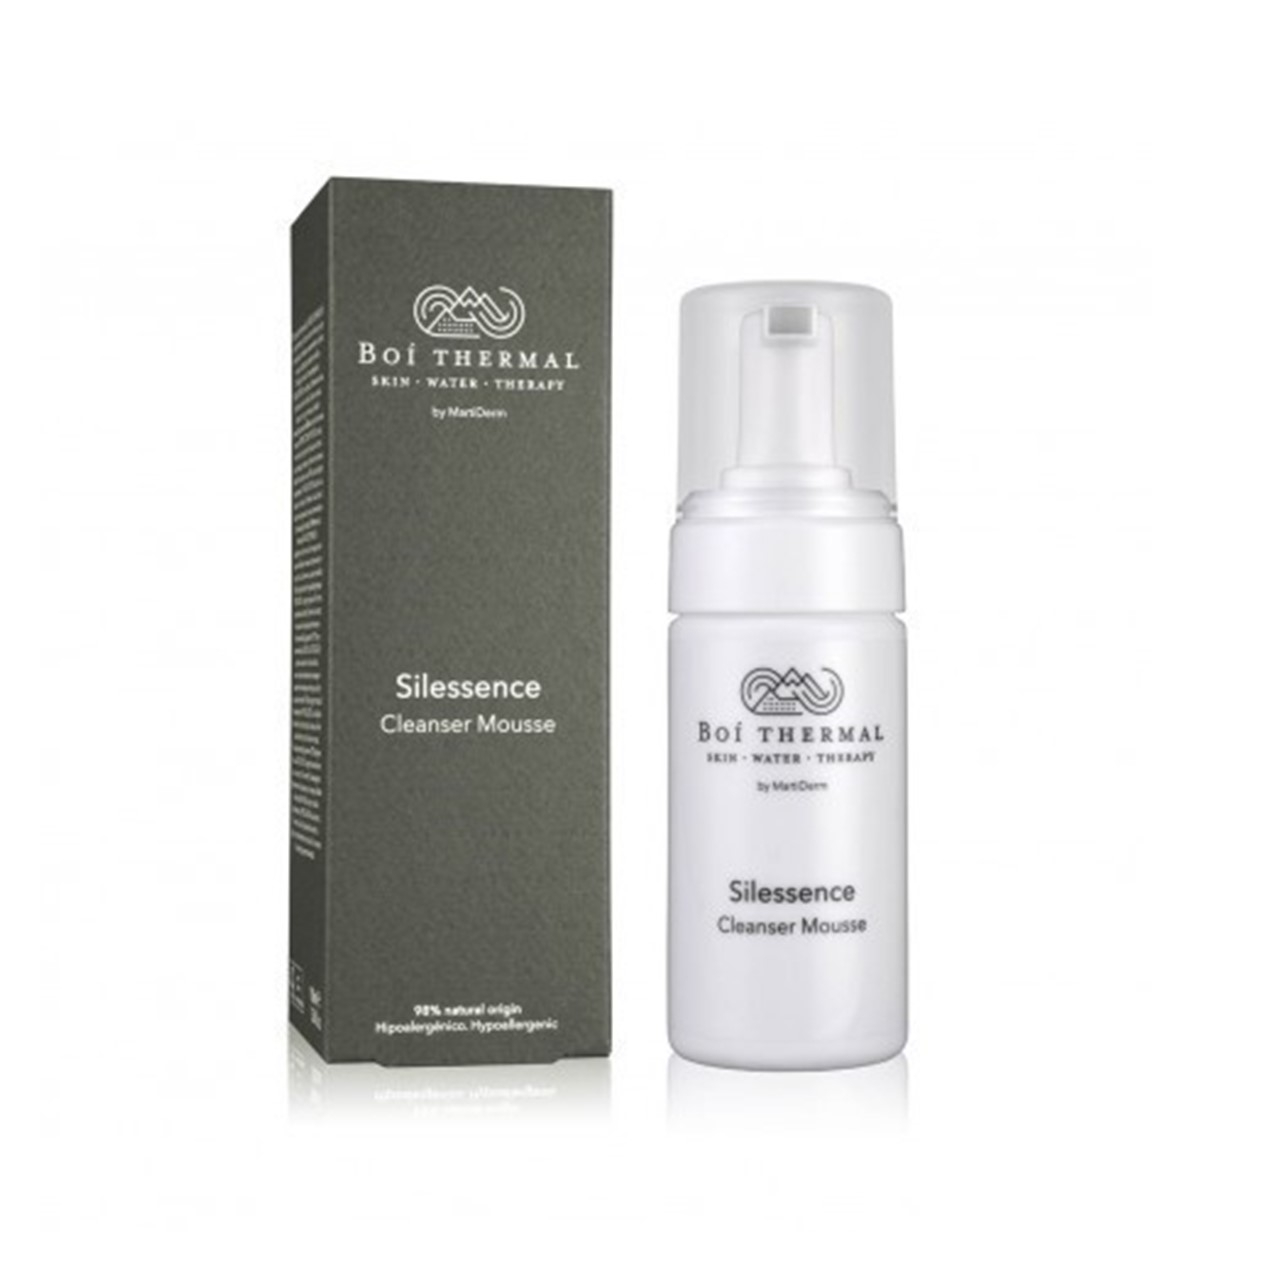 Boí Thermal Silessence Cleanser Mousse 100ml